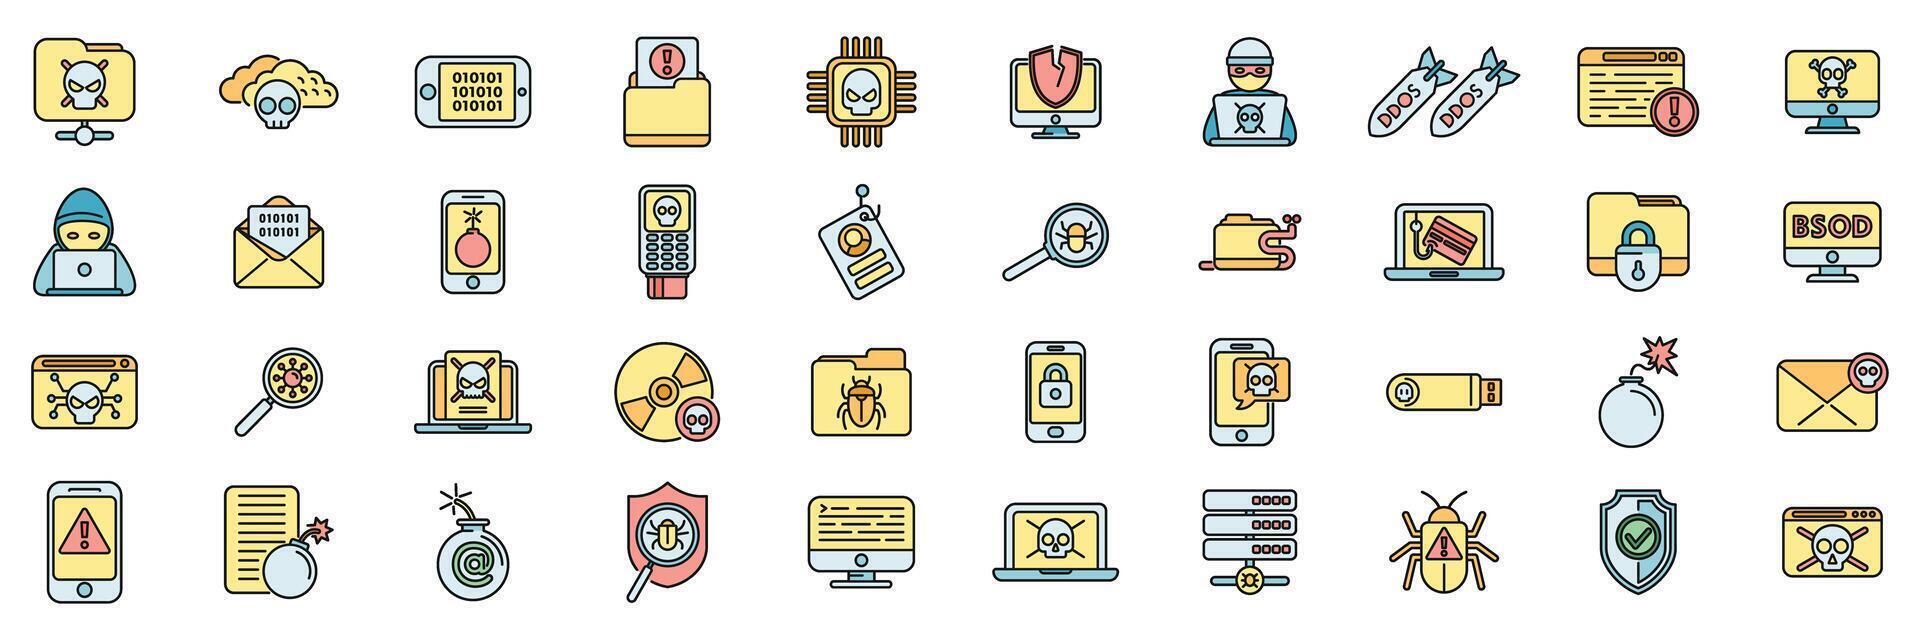 Malware icons set color line vector